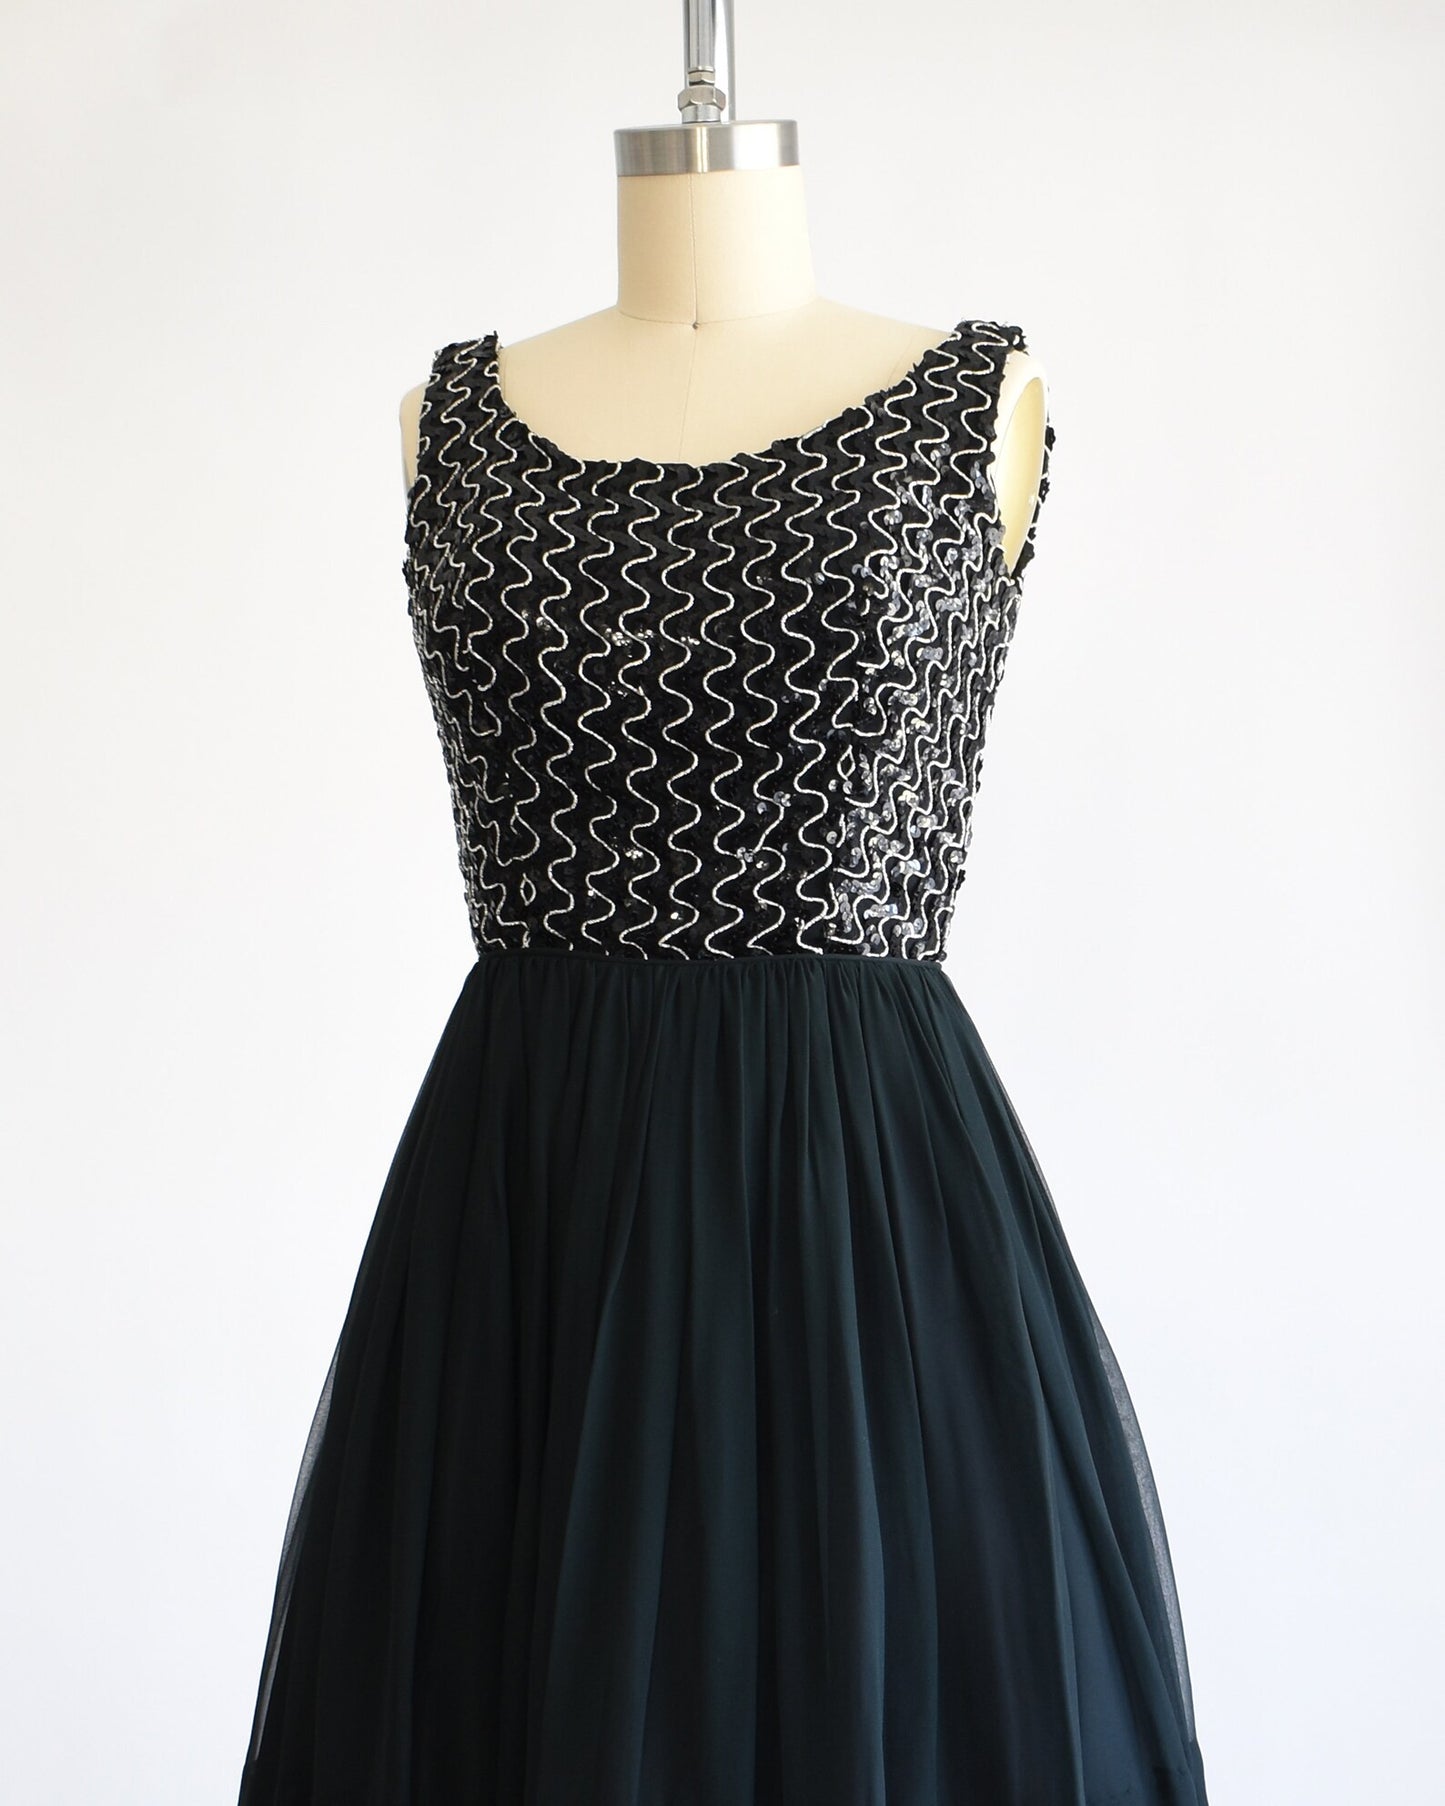 Side front view of a vintage 60s dress with a black sequin bodice with silver vertical squiggles. The skirt is a layered with black chiffon on top. The dress is modeled on a dress form.